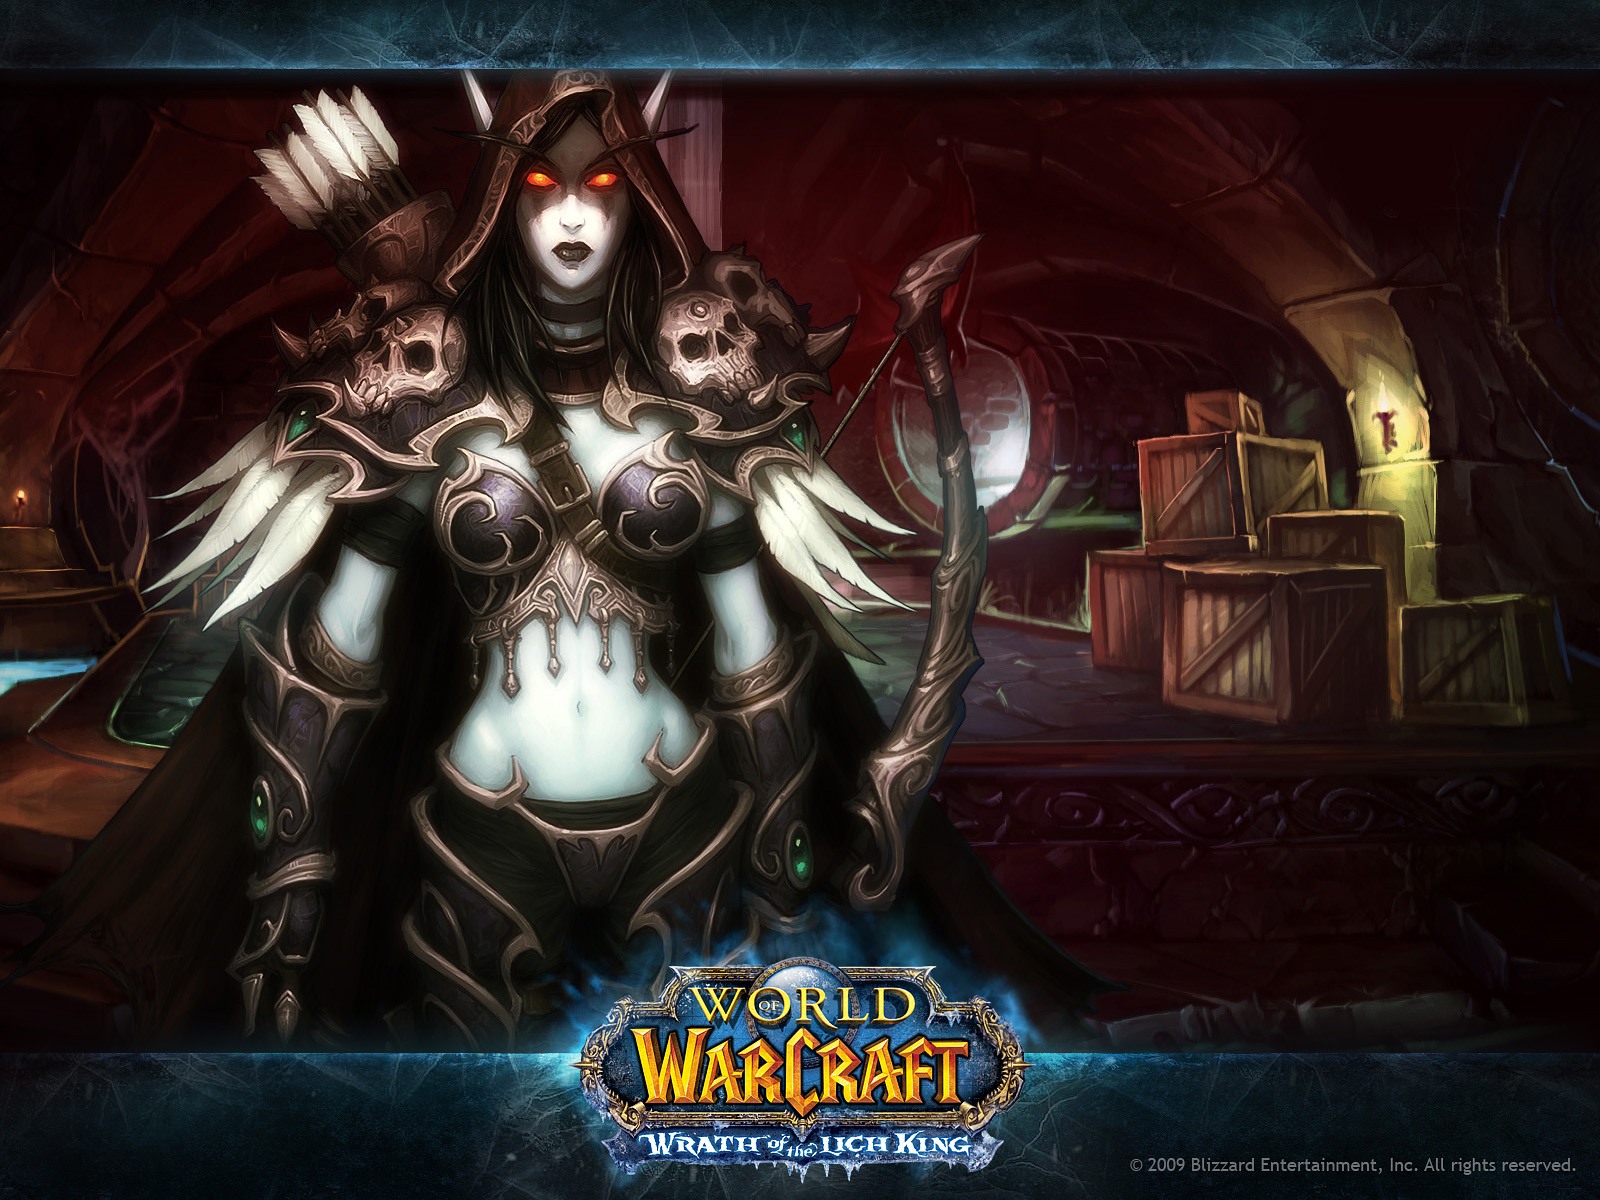  of Warcraft Wrath of the Lich King wallpapers   GameWallpaperscom 1600x1200